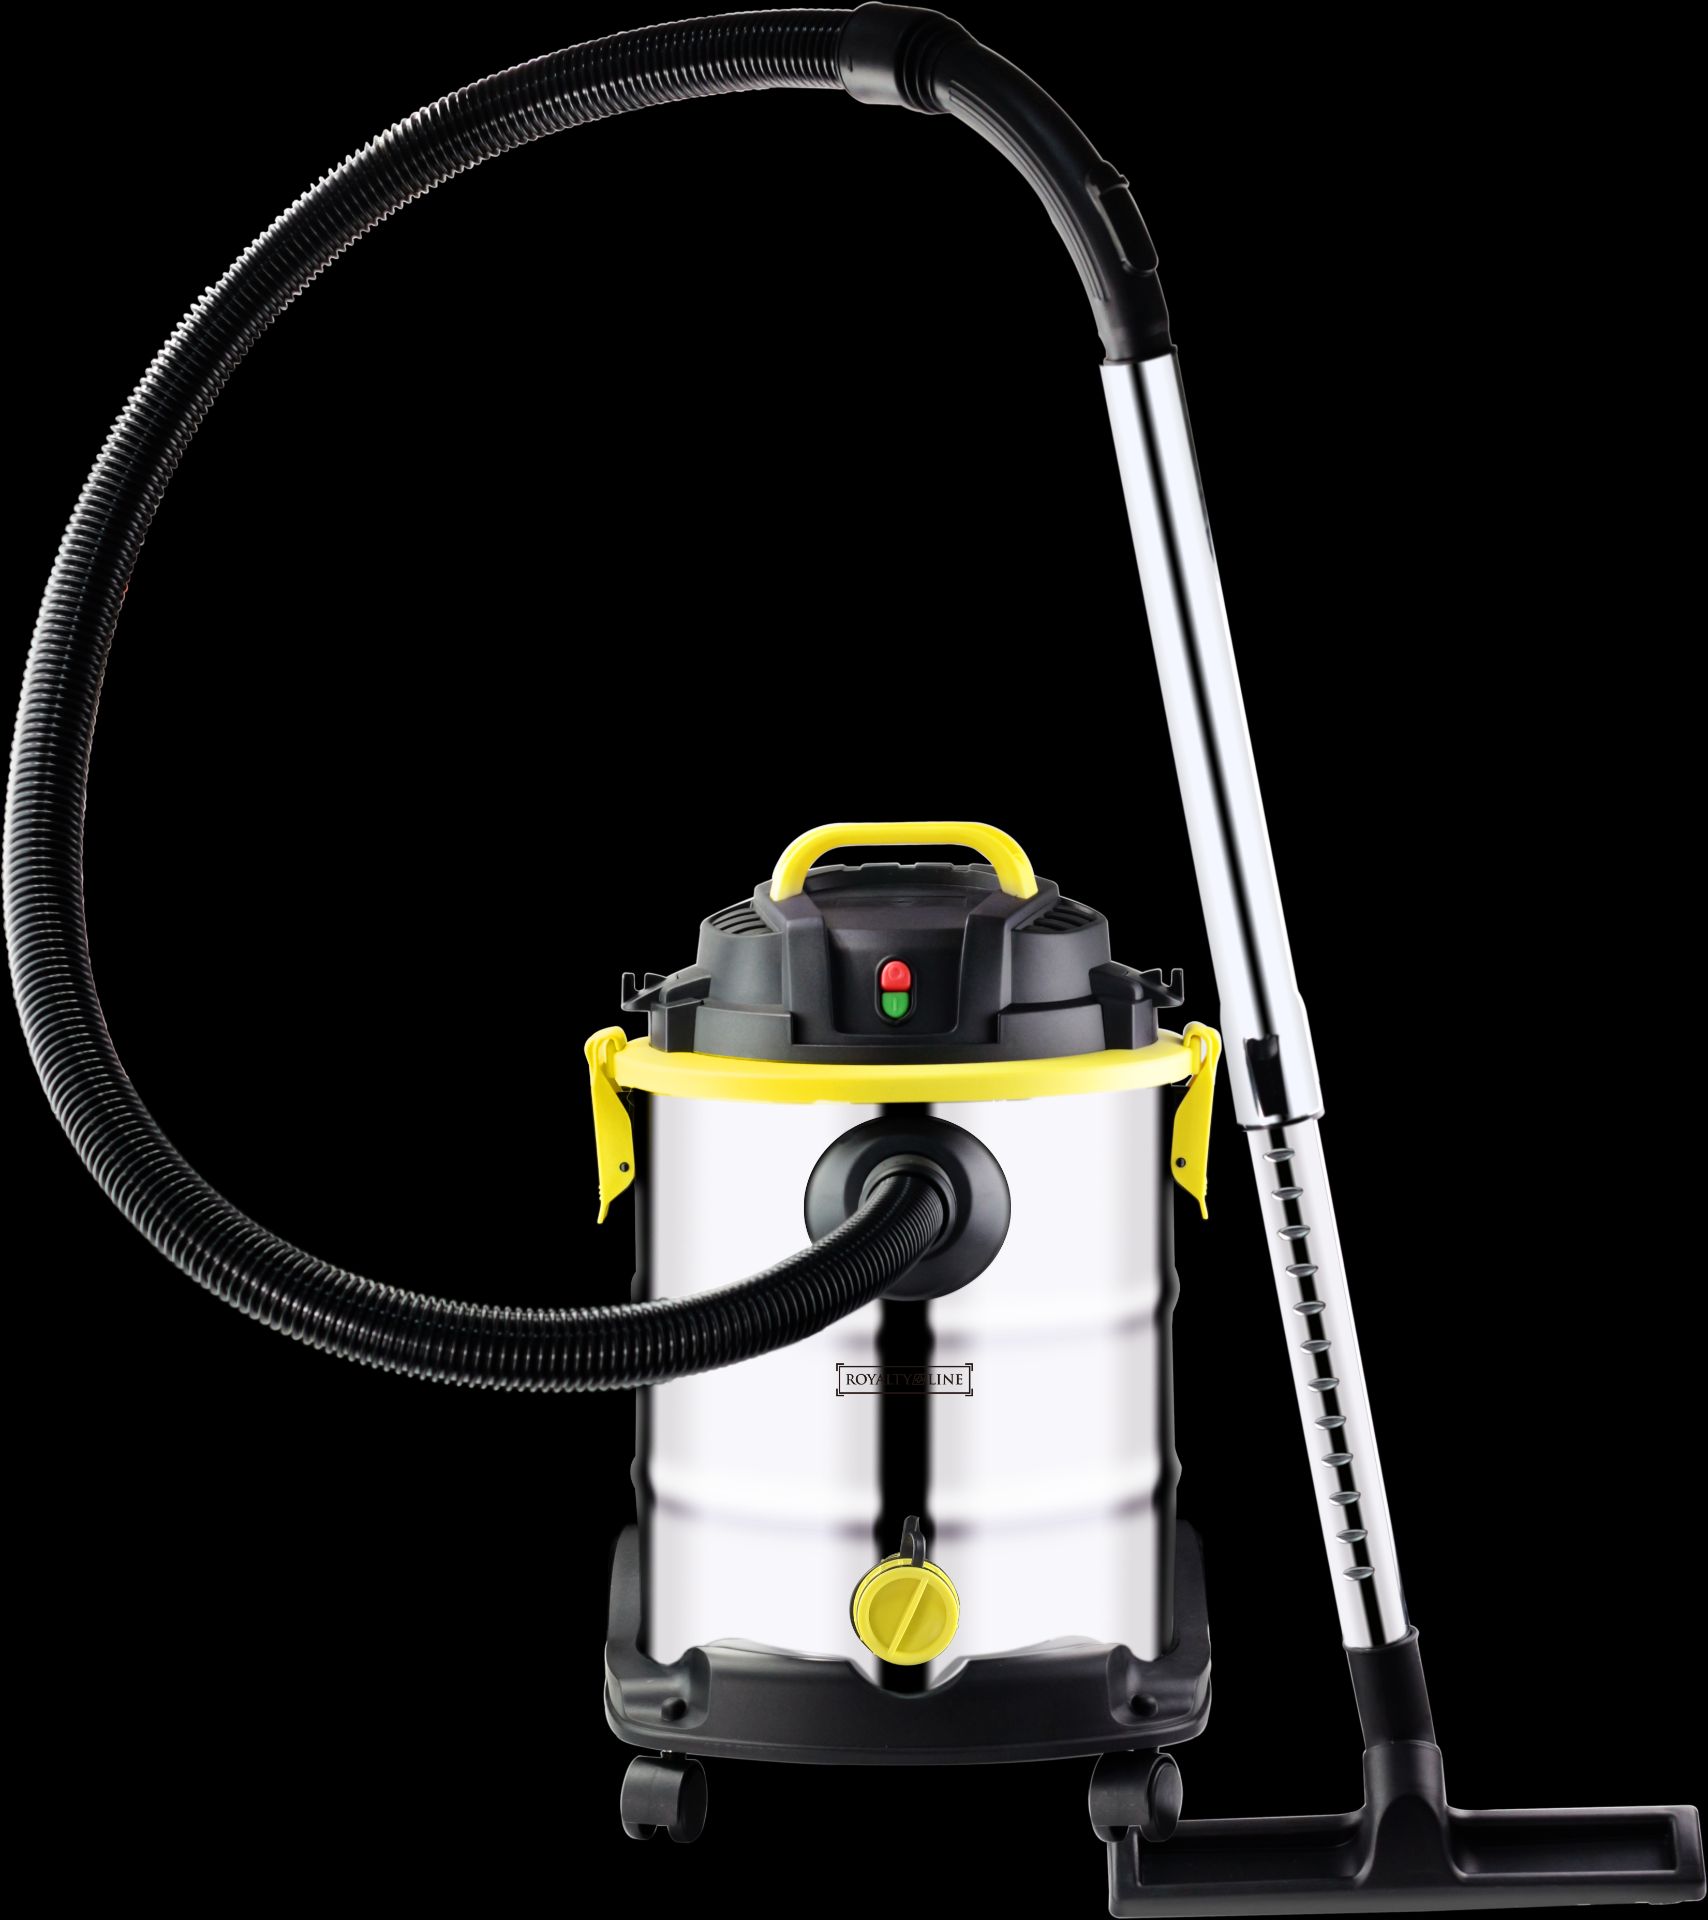 V Brand New Wet and Dry Vacuum Cleaner - 1400W - 30L Capacity - Multi-Layer Filtering - Easy Clean